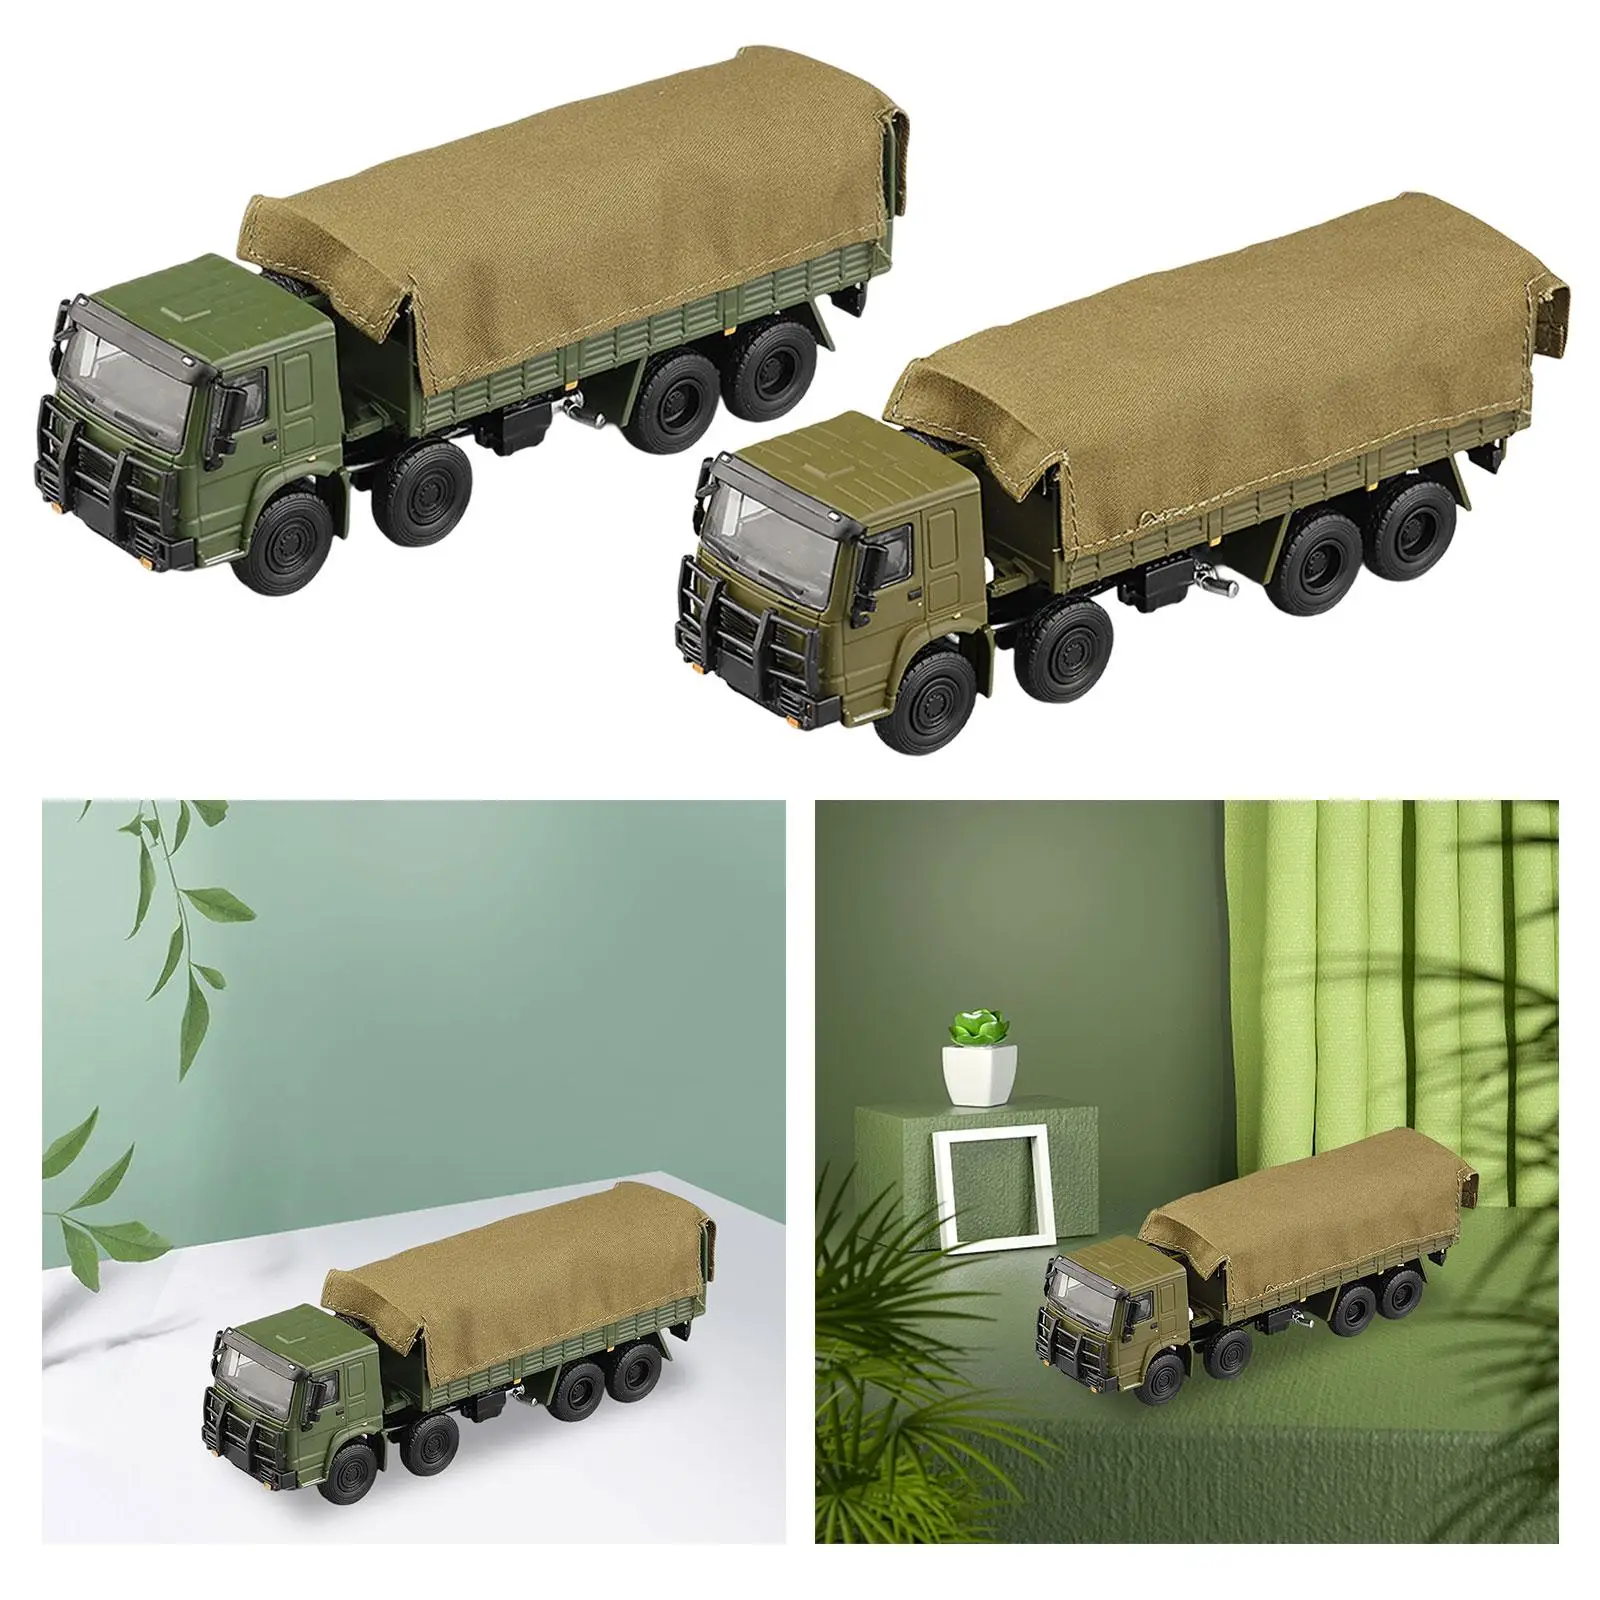 1/64 Miniature Car Toys Diorama Scenes Collection Alloy Classic Car Model for Scenery Landscape Photography Props Decoration